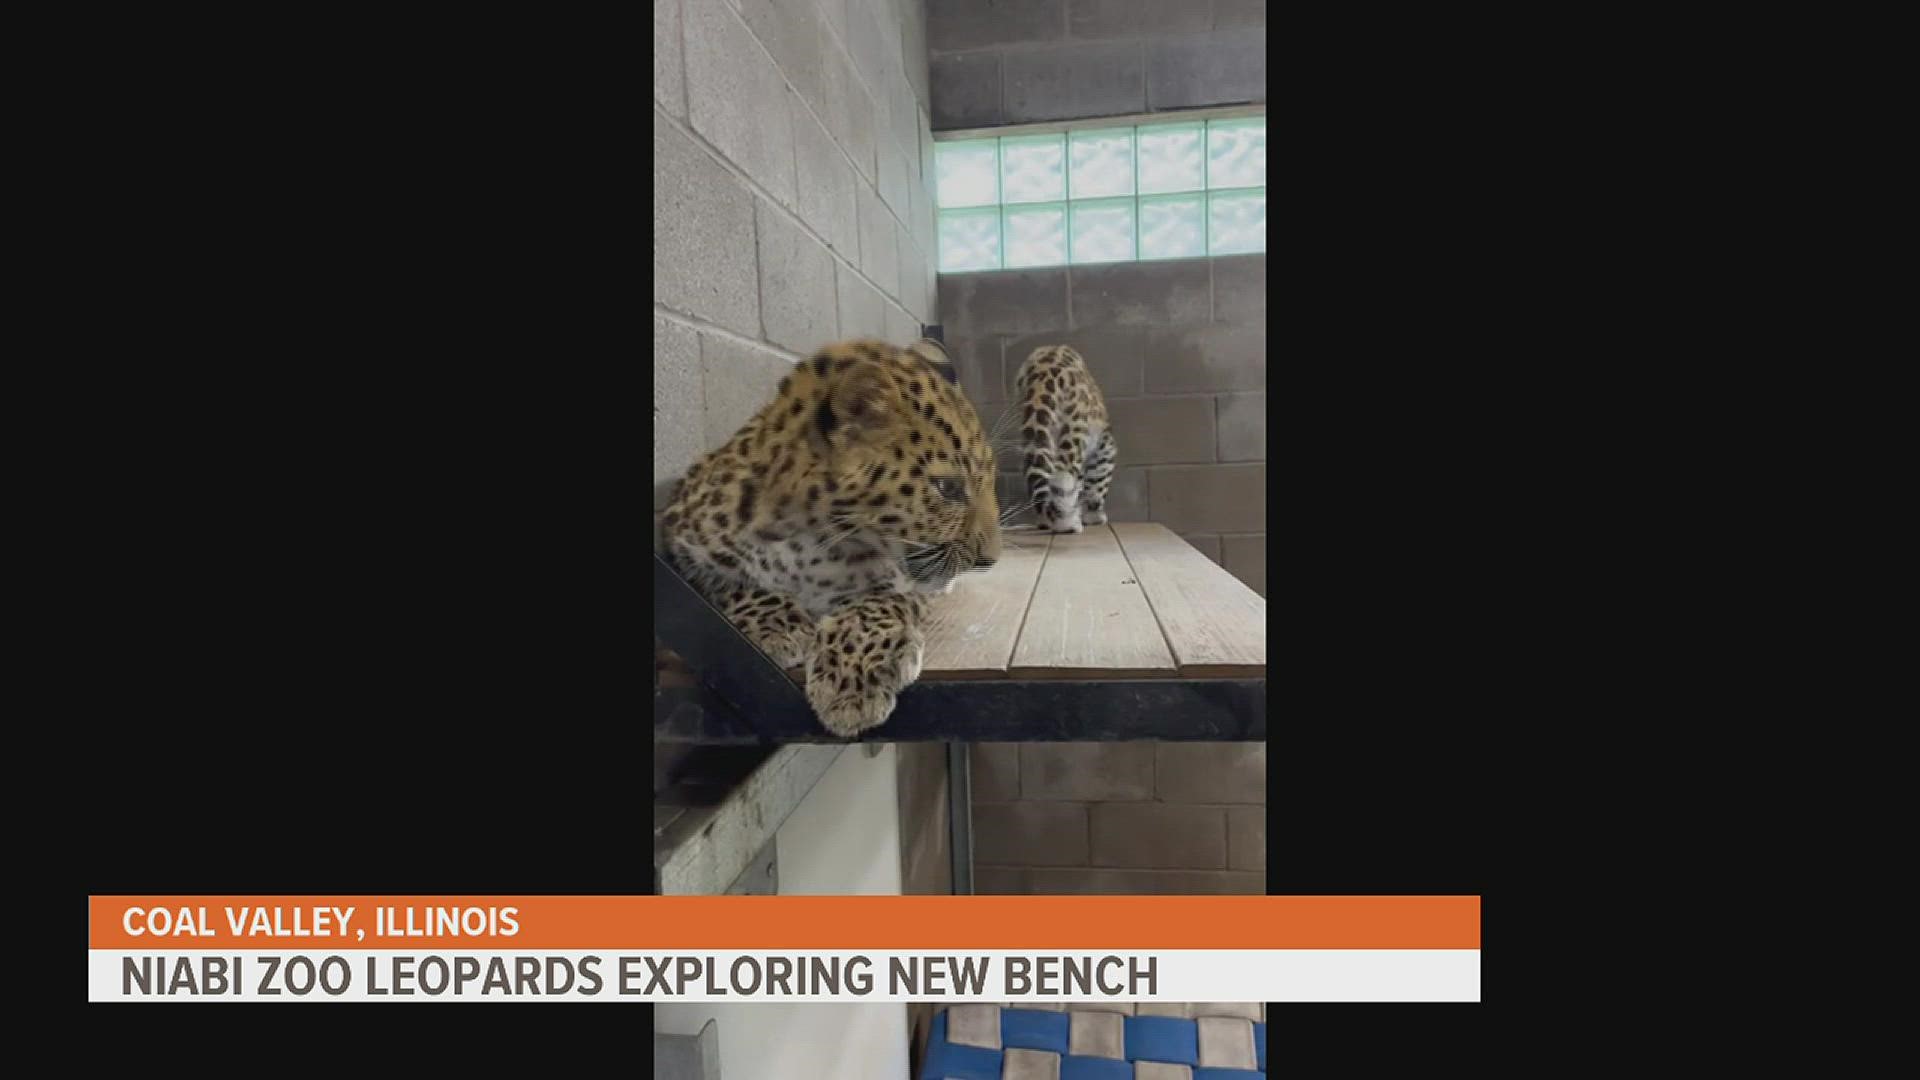 The leopard cubs are exploring a new bench installed in their Coal Valley home.